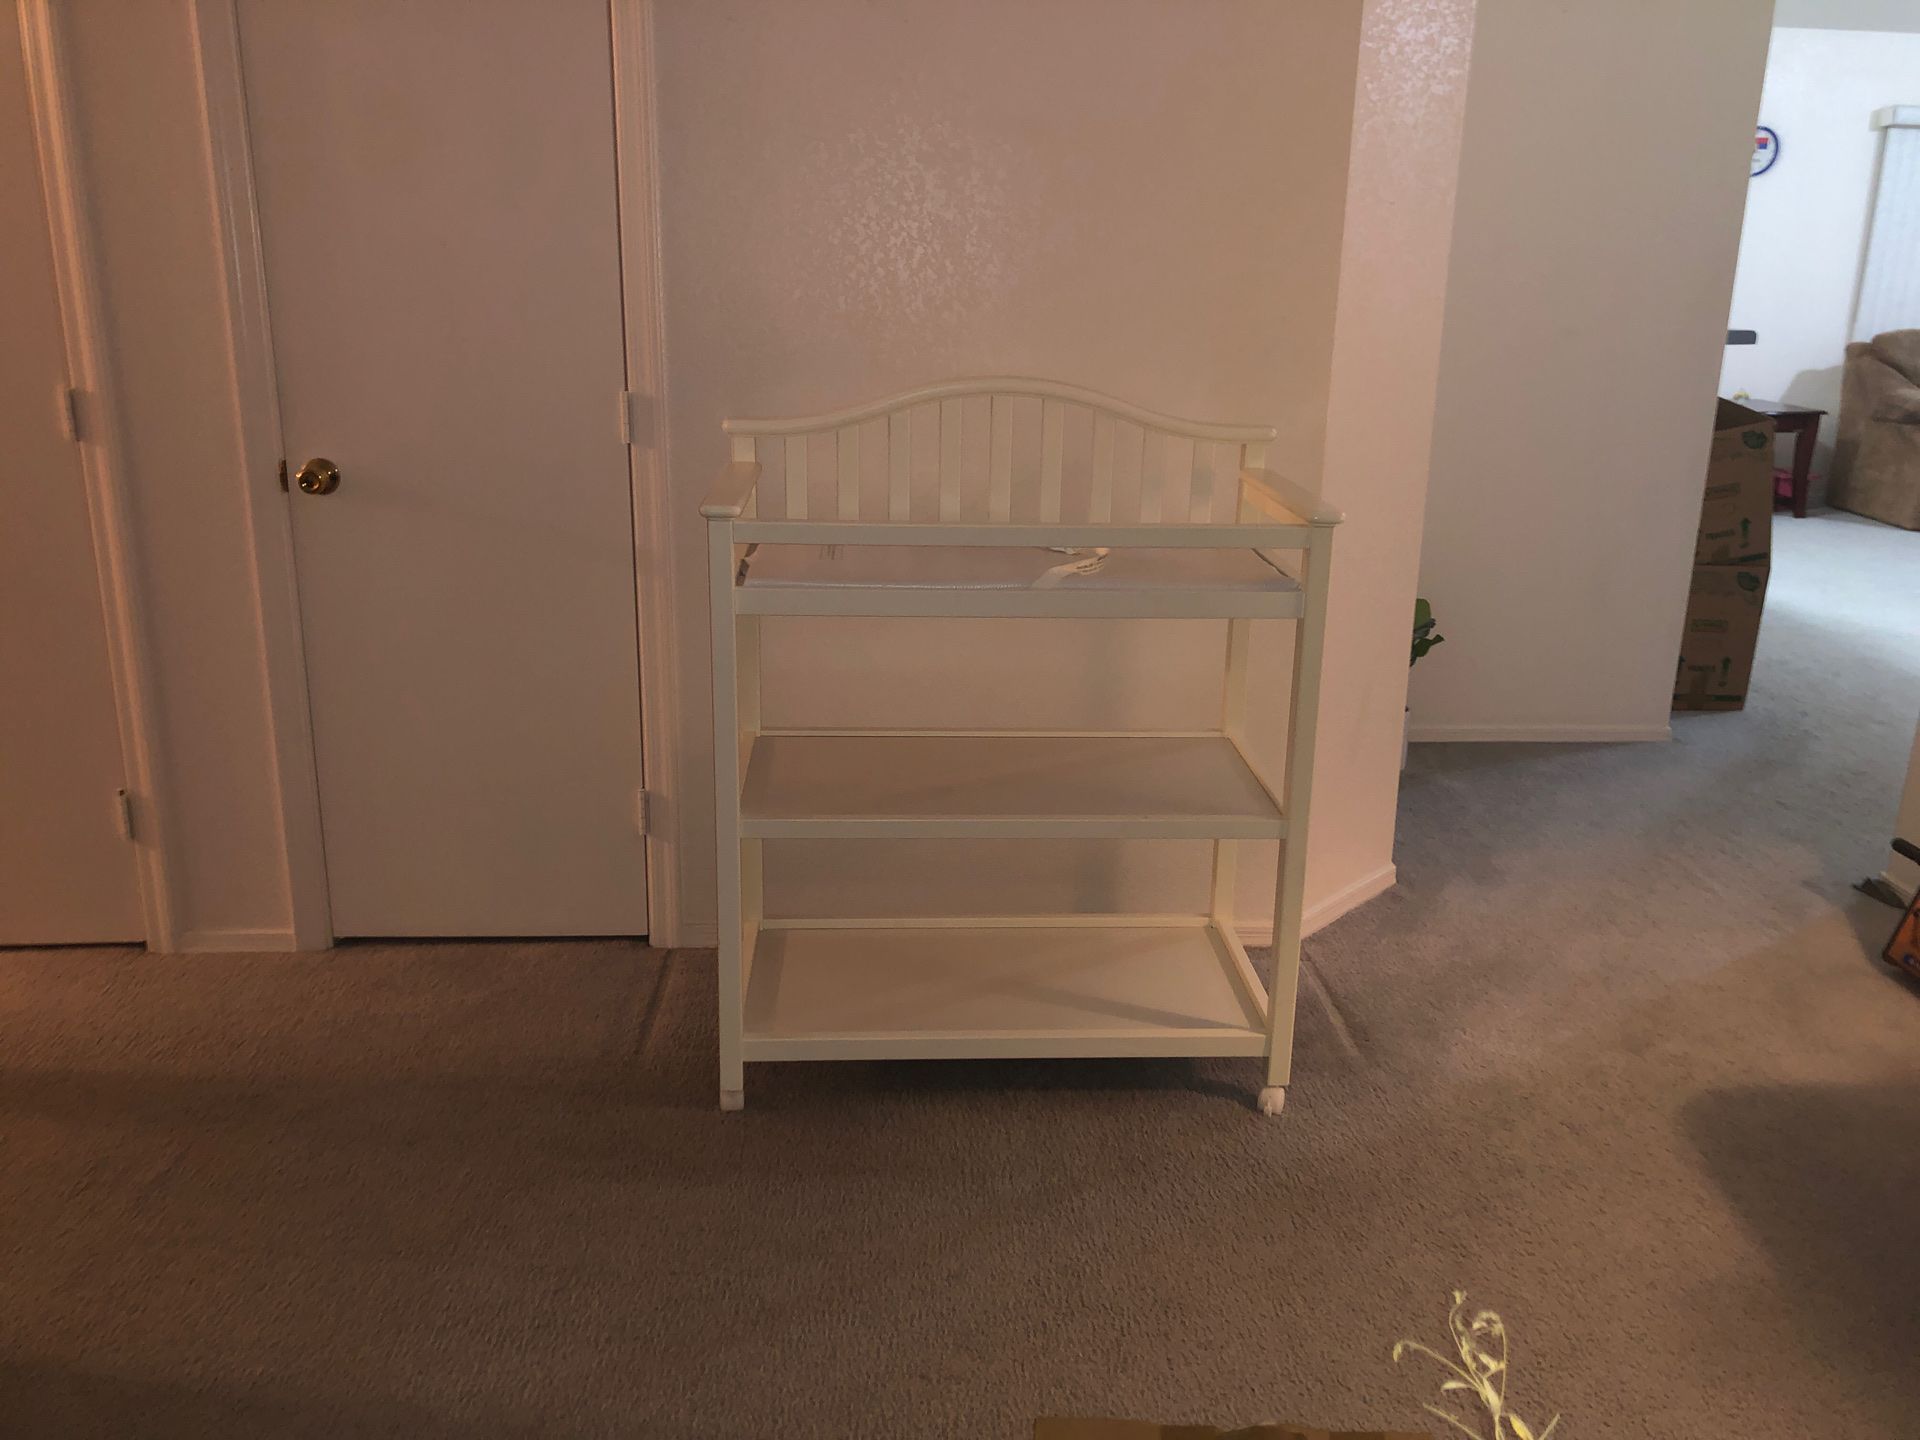 Graco baby changing table